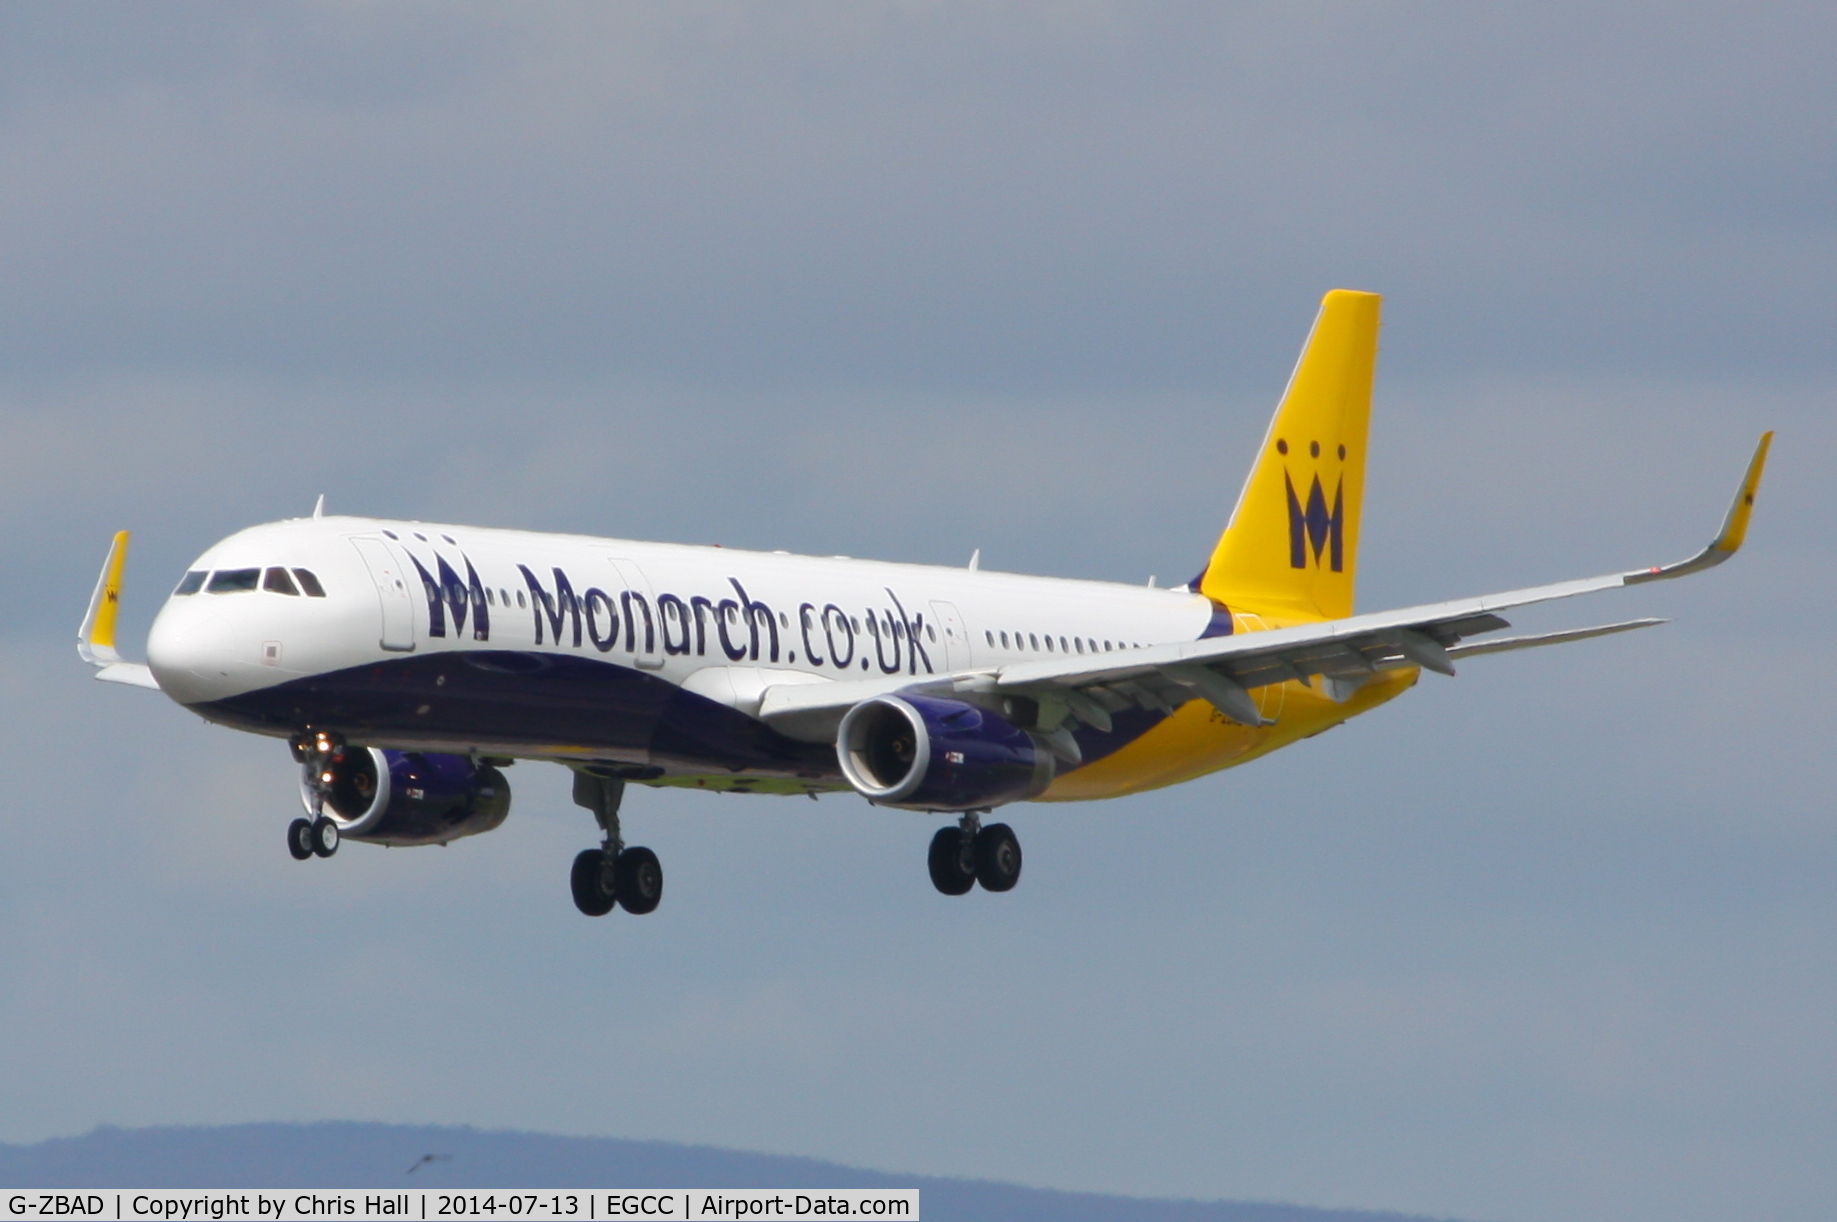 G-ZBAD, 2013 Airbus A321-231 C/N 5582, Monarch